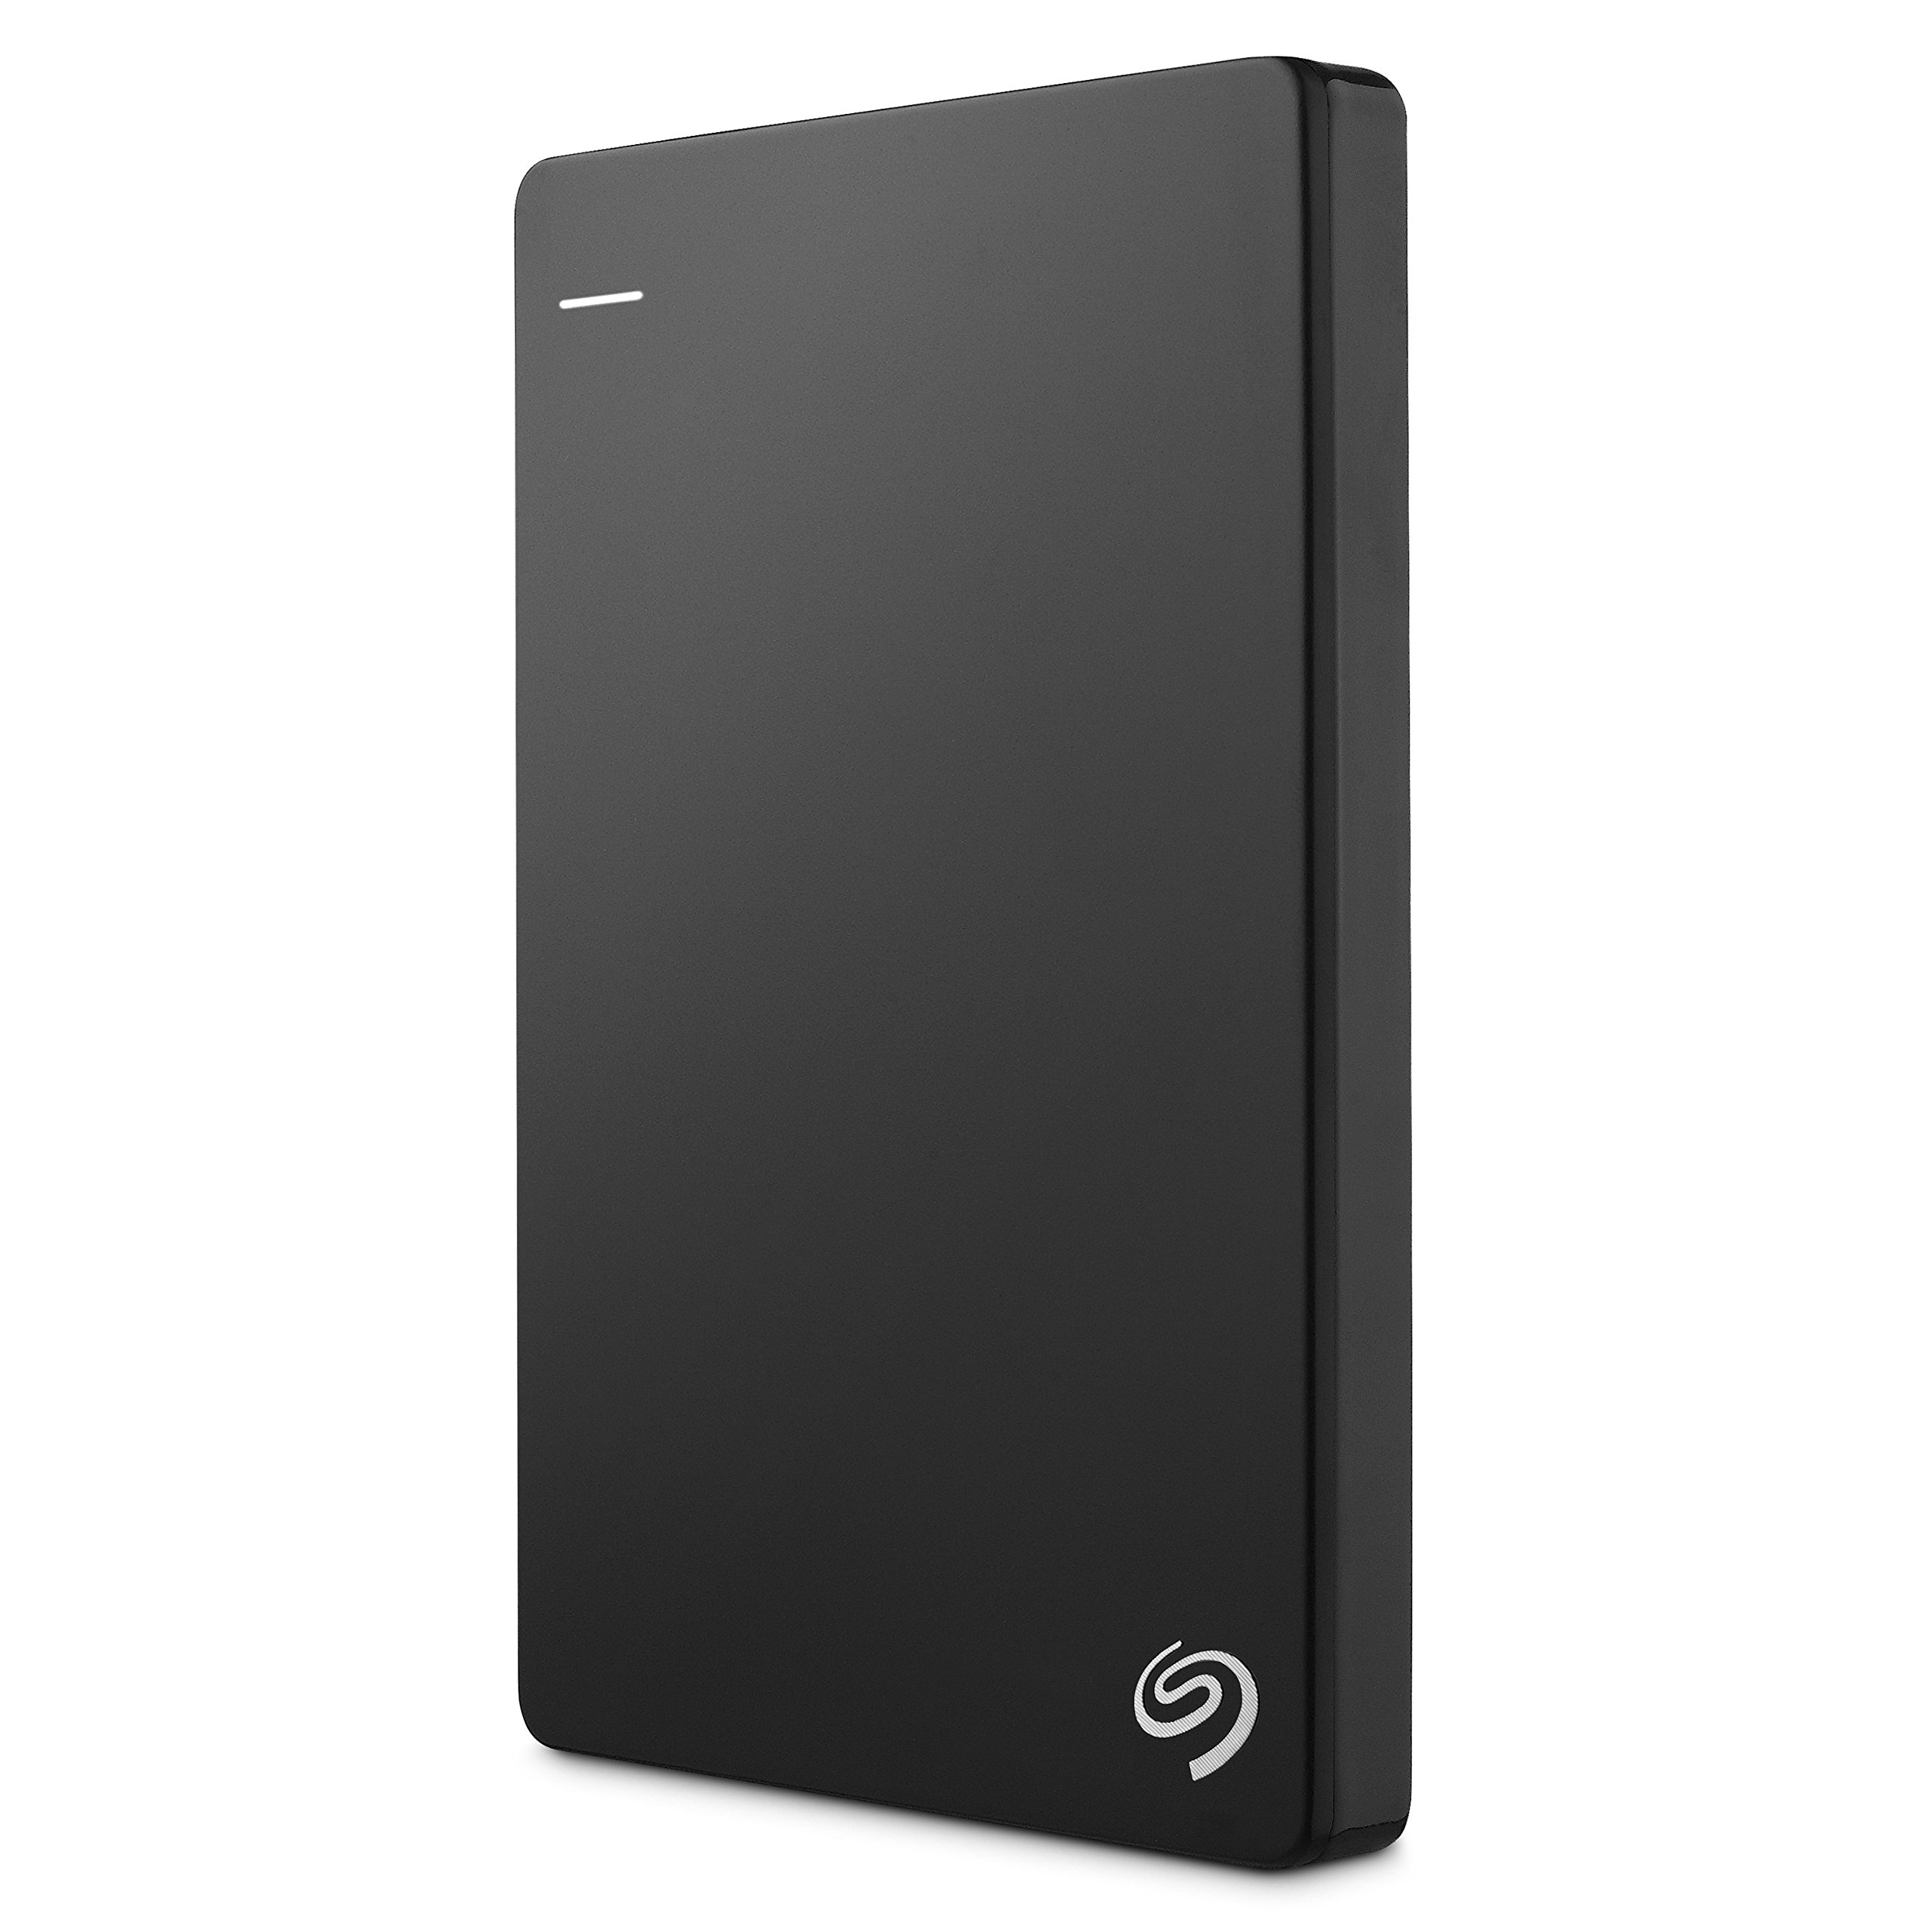 Seagate Backup Plus Slim 2TB External Hard Drive Portable HDD – Black USB 3.0 for PC Laptop and Mac, 2 Months Adobe CC Photography (STDR2000100)